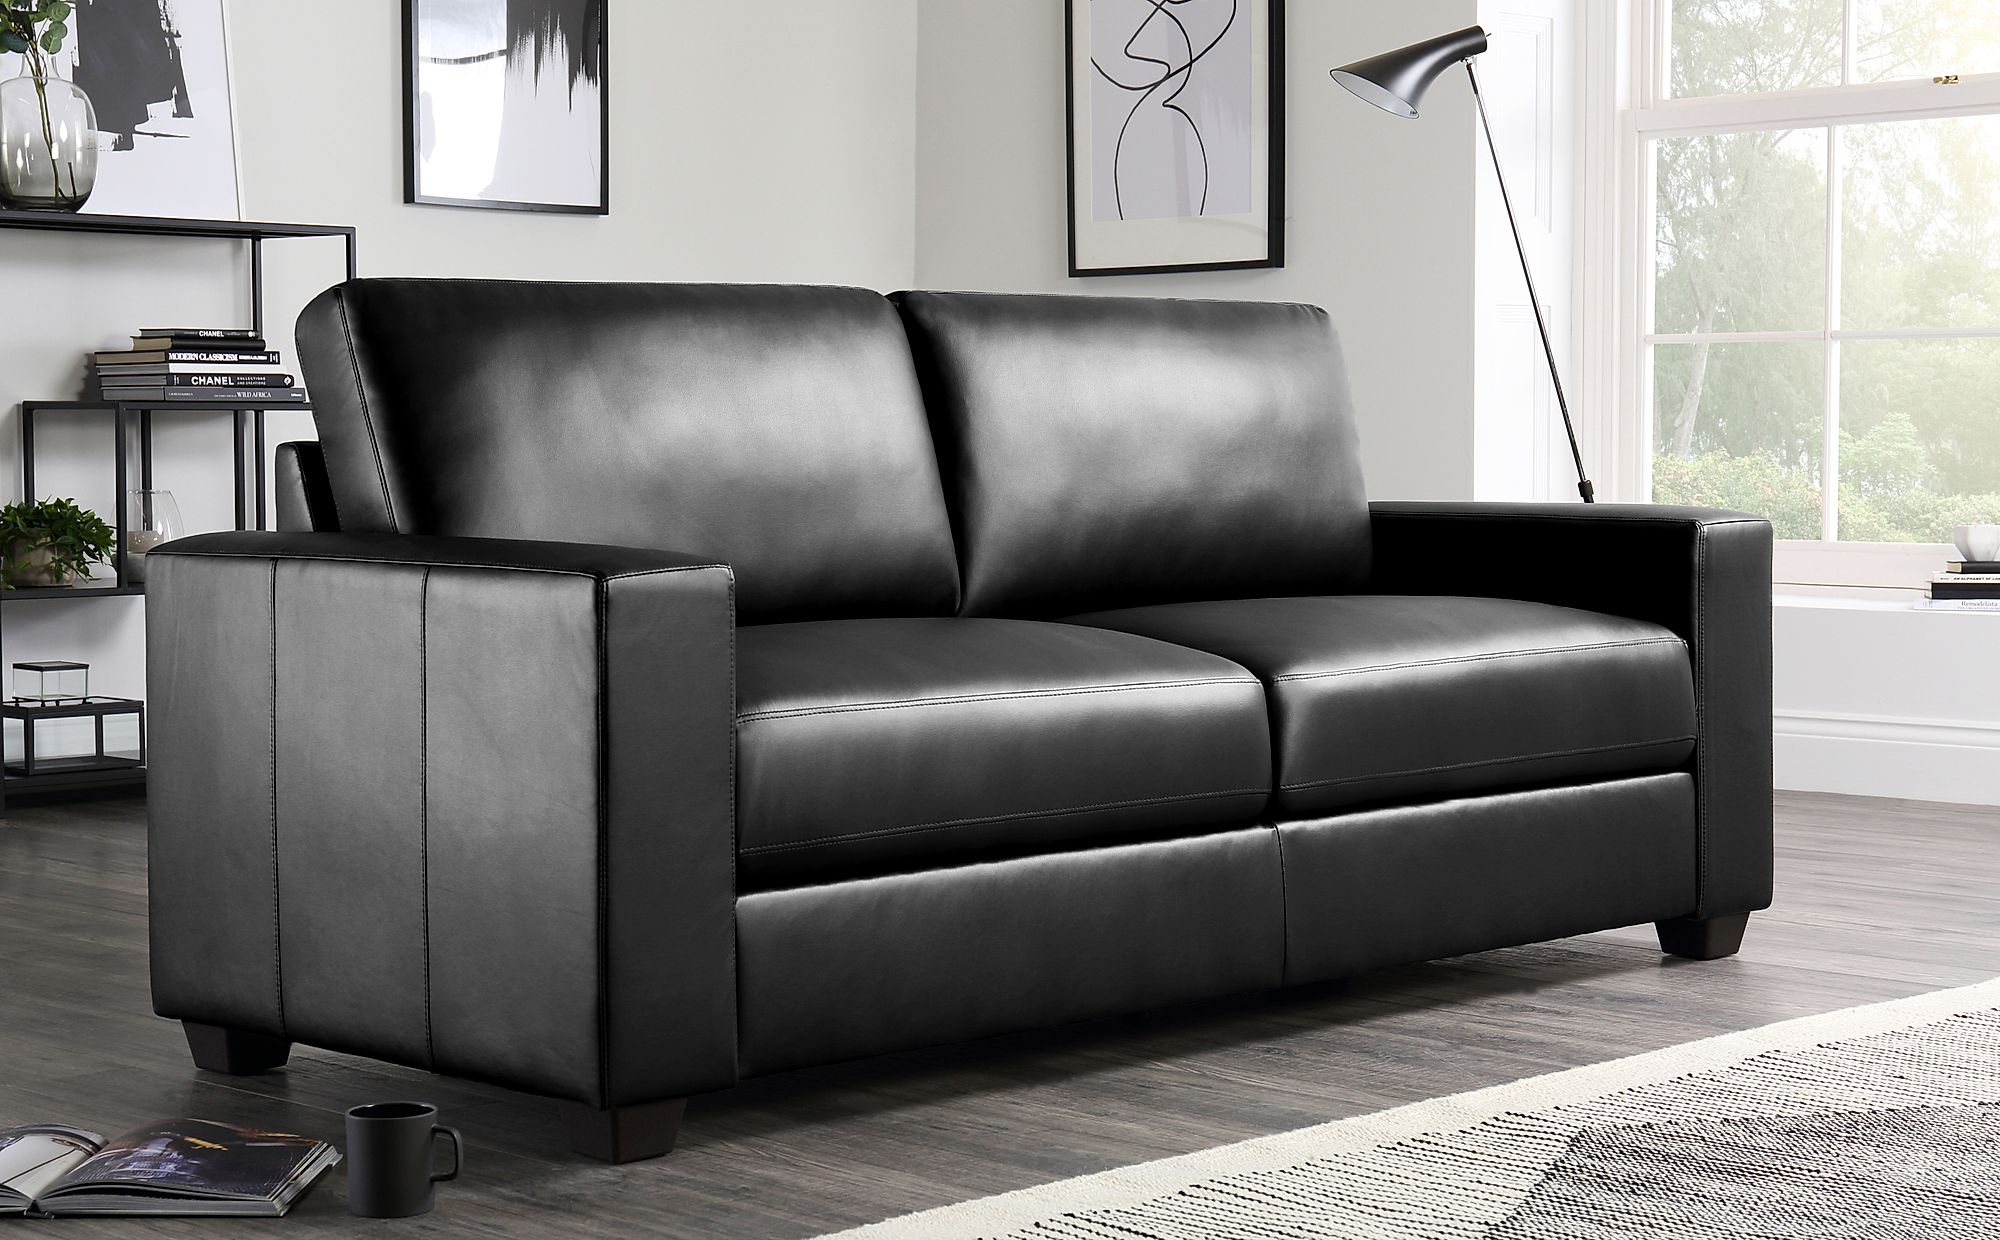 3 seater leather sofa bed with chaise